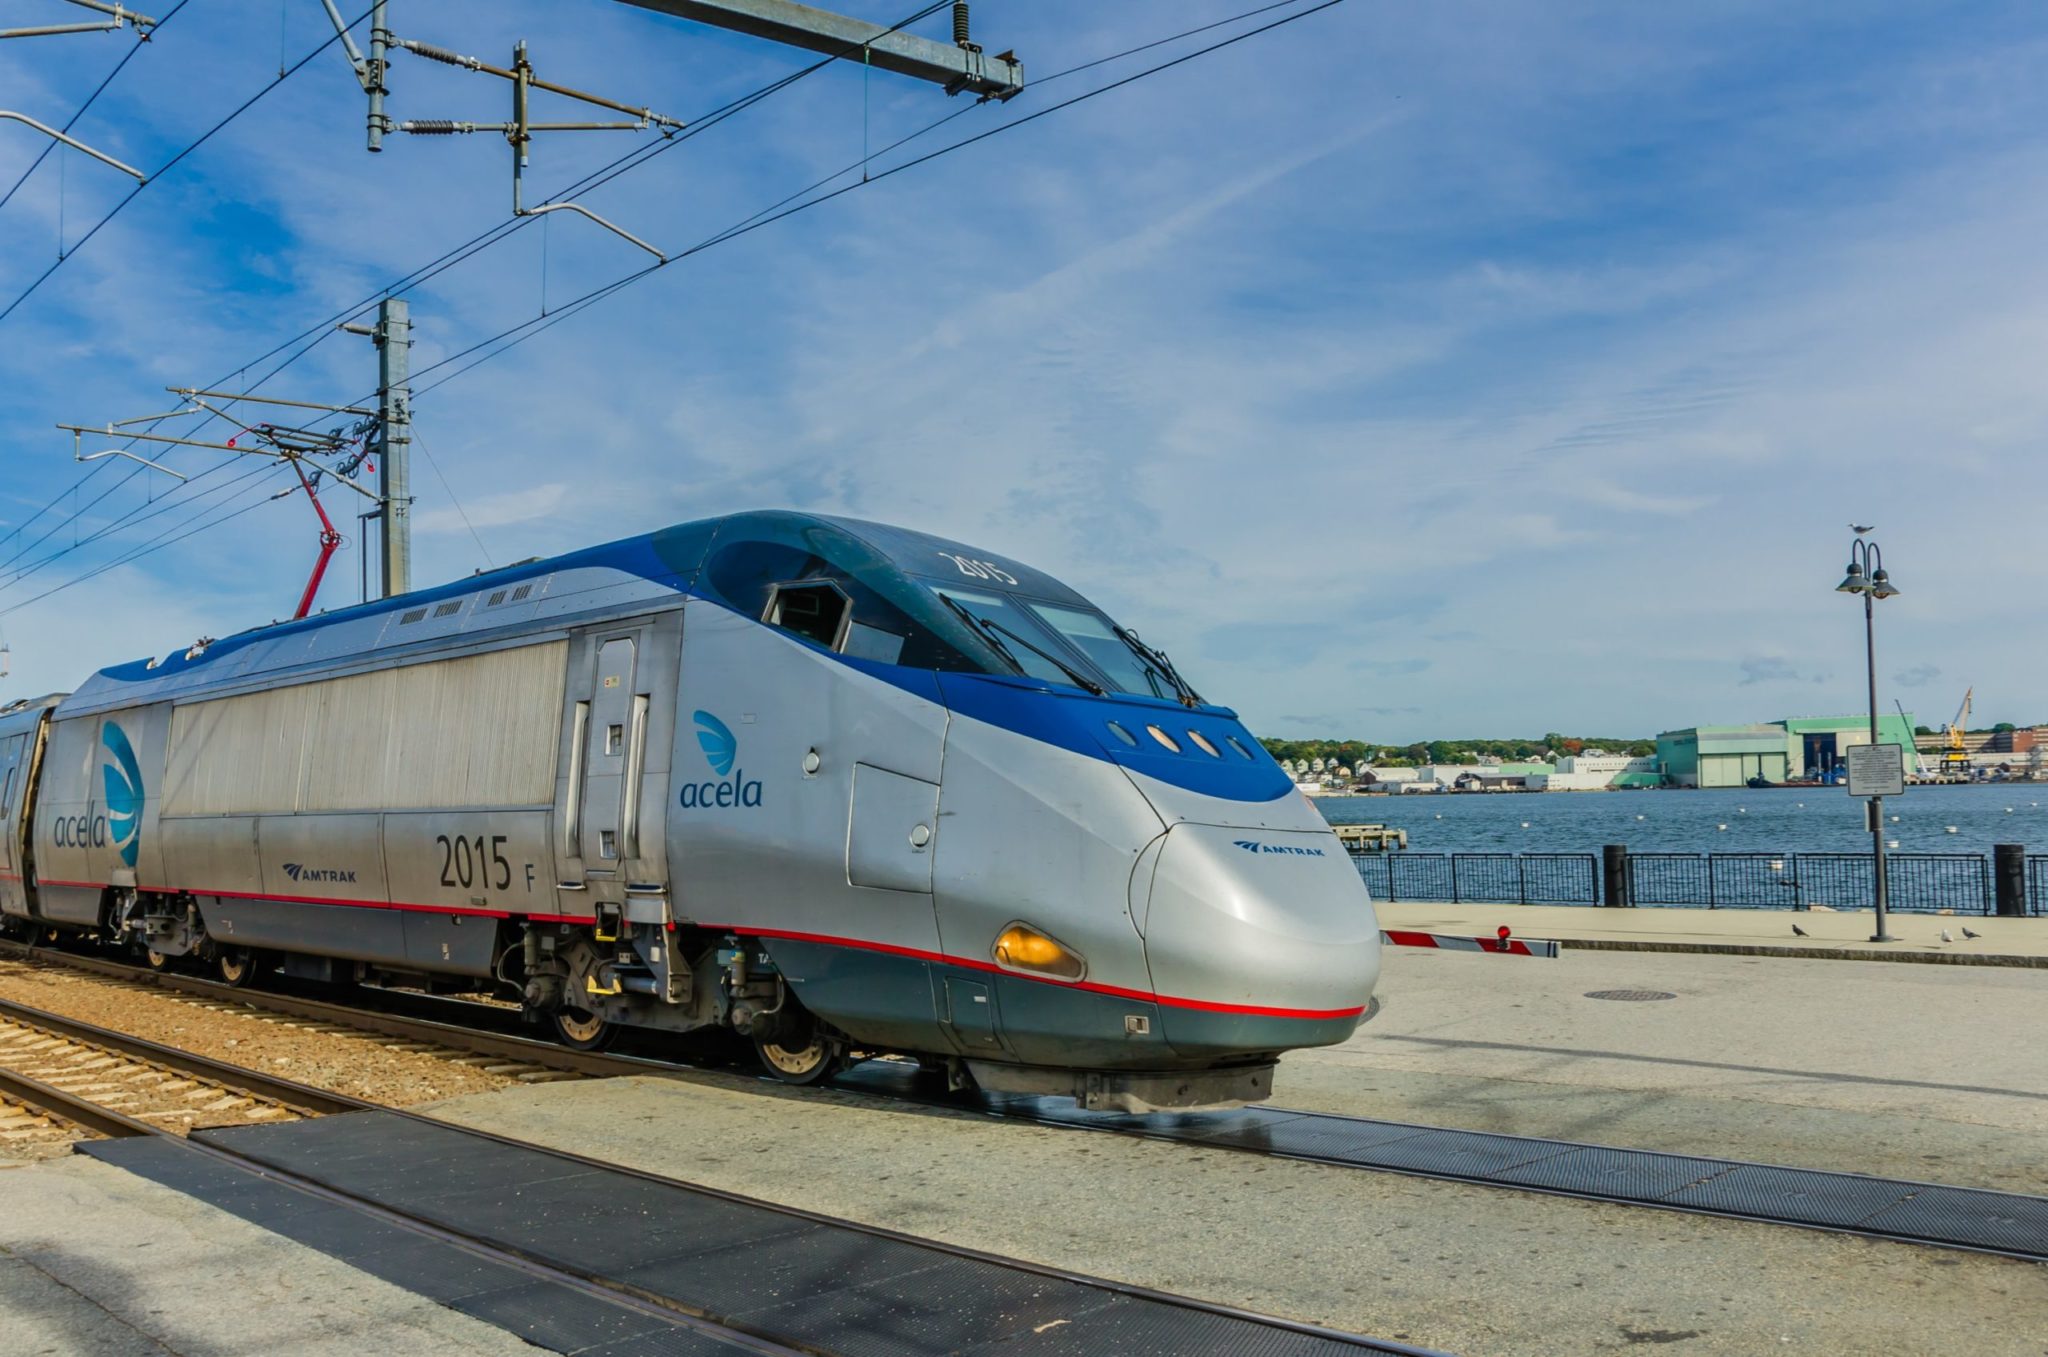 Amtrak Announces Nonstop Acela Service Between Dc And New York